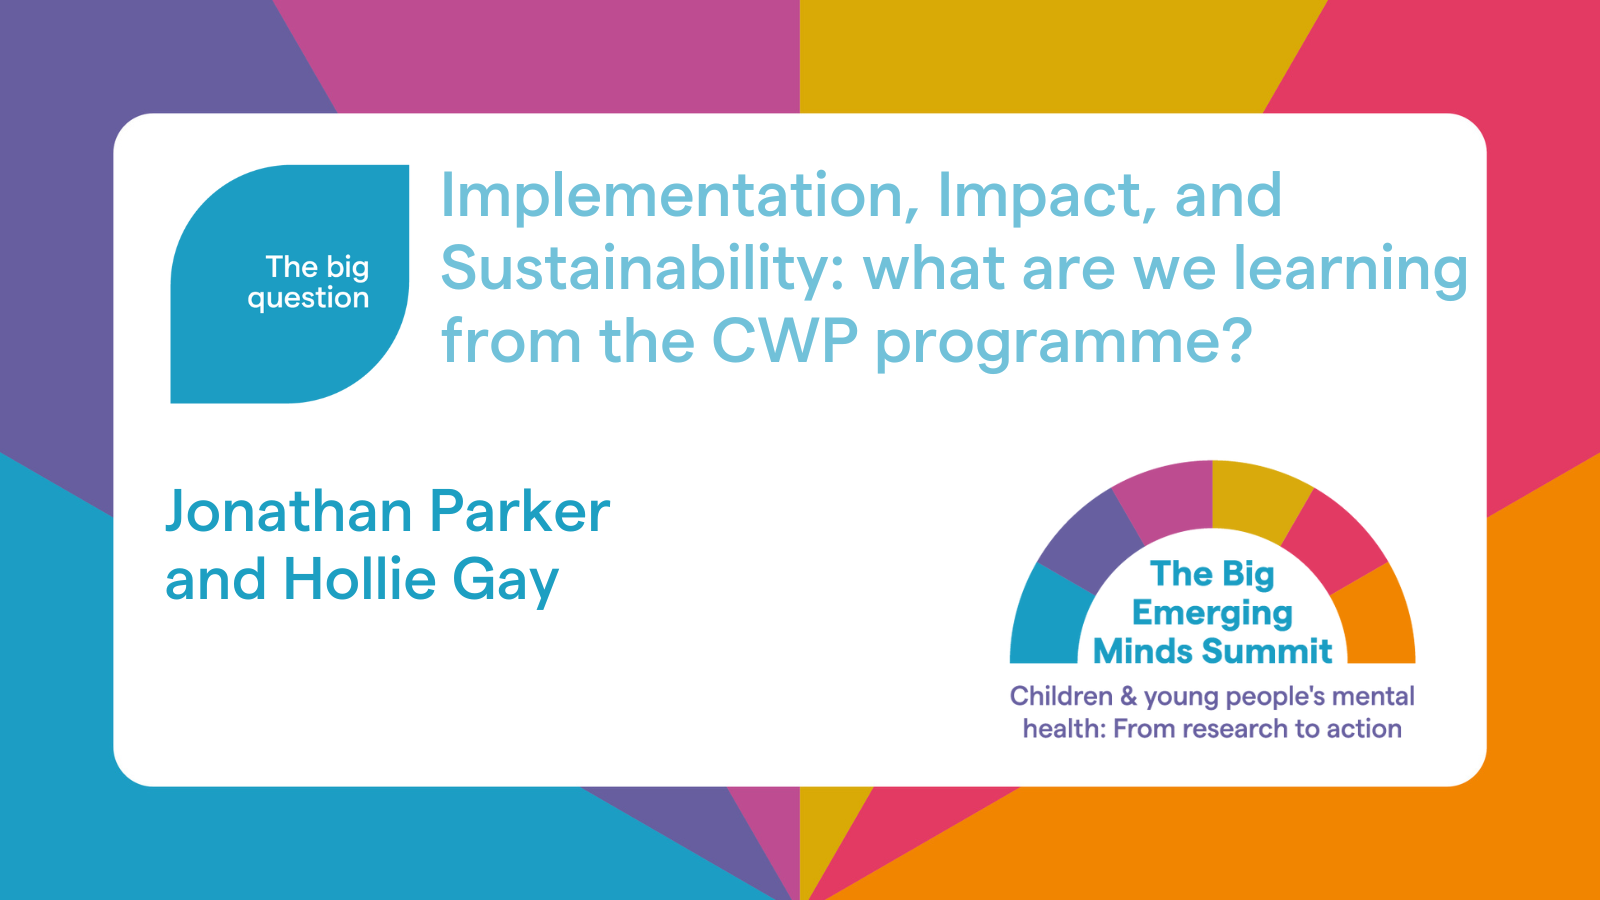 Implementation, impact, and sustainability: what are we learning from the CWP programme?